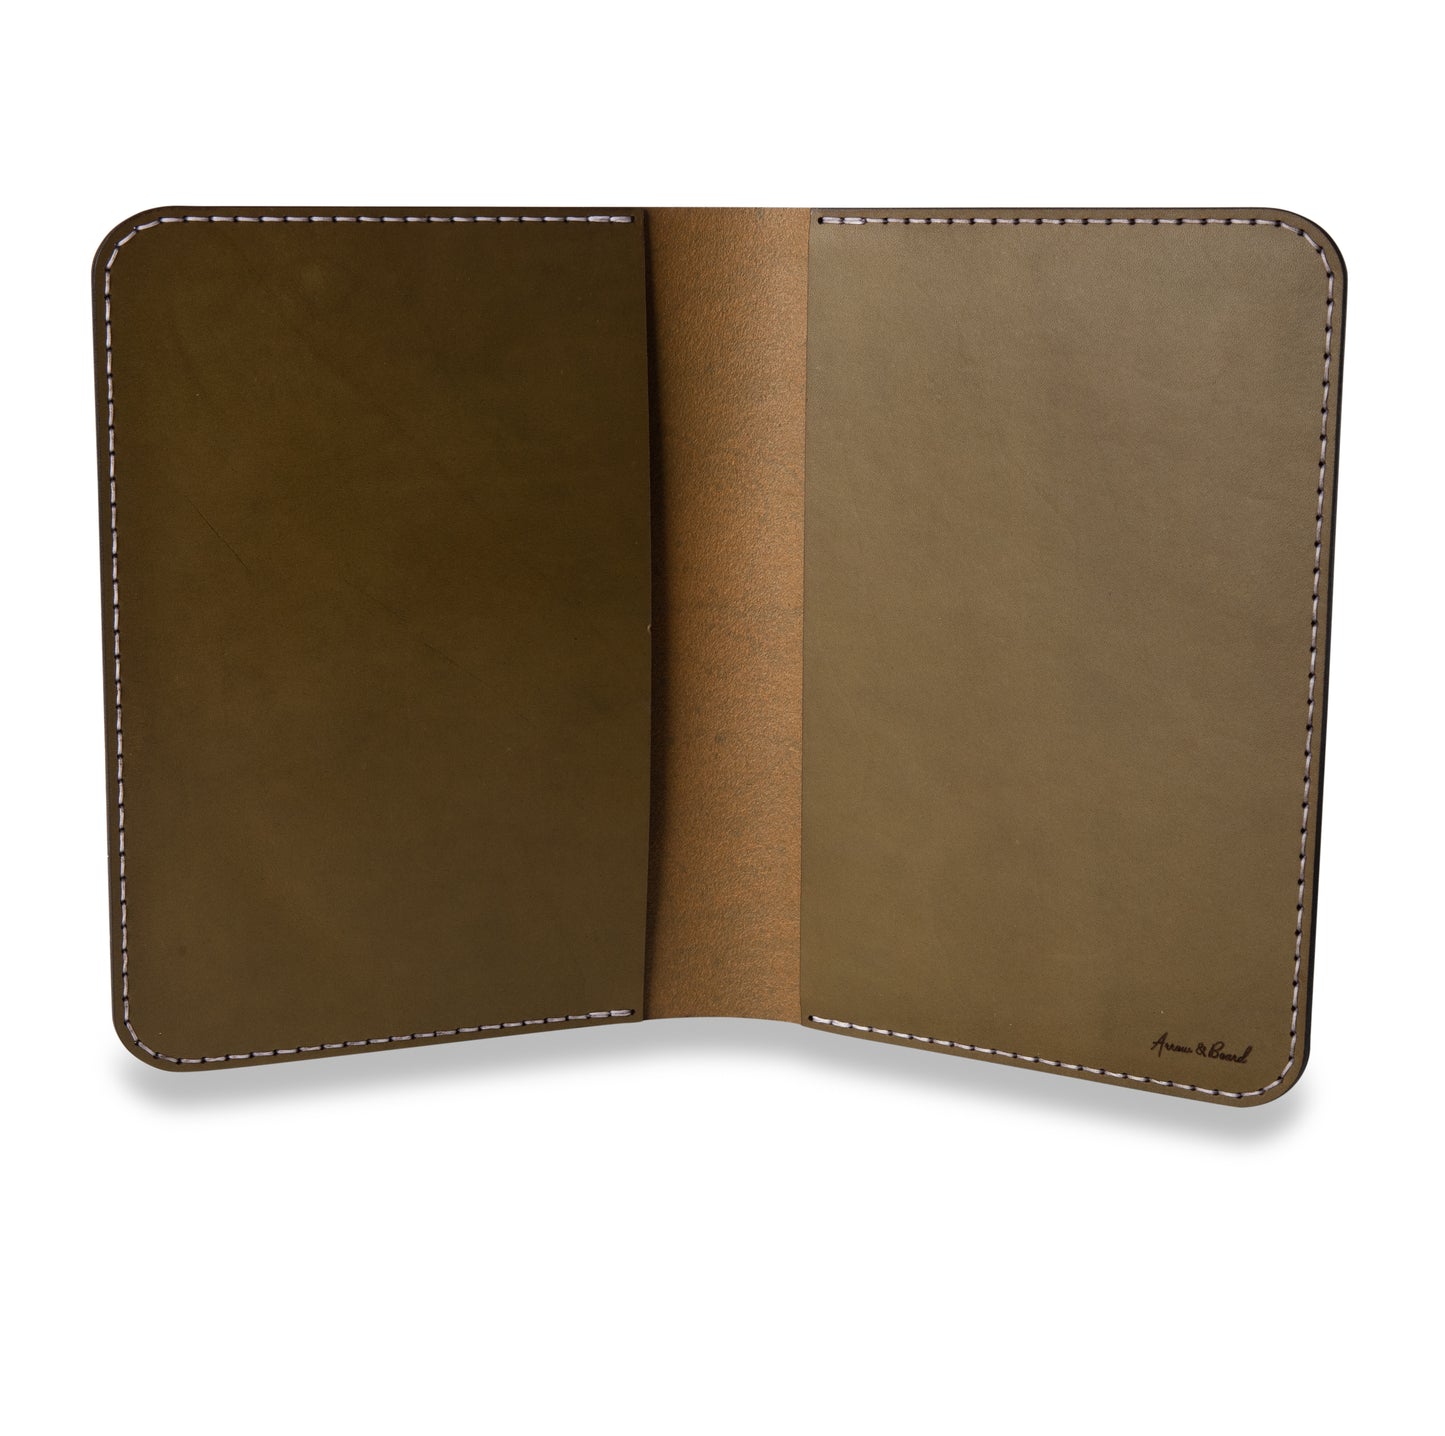 Load image into Gallery viewer, Leather Journal Cover w/ Notebook - Olive
